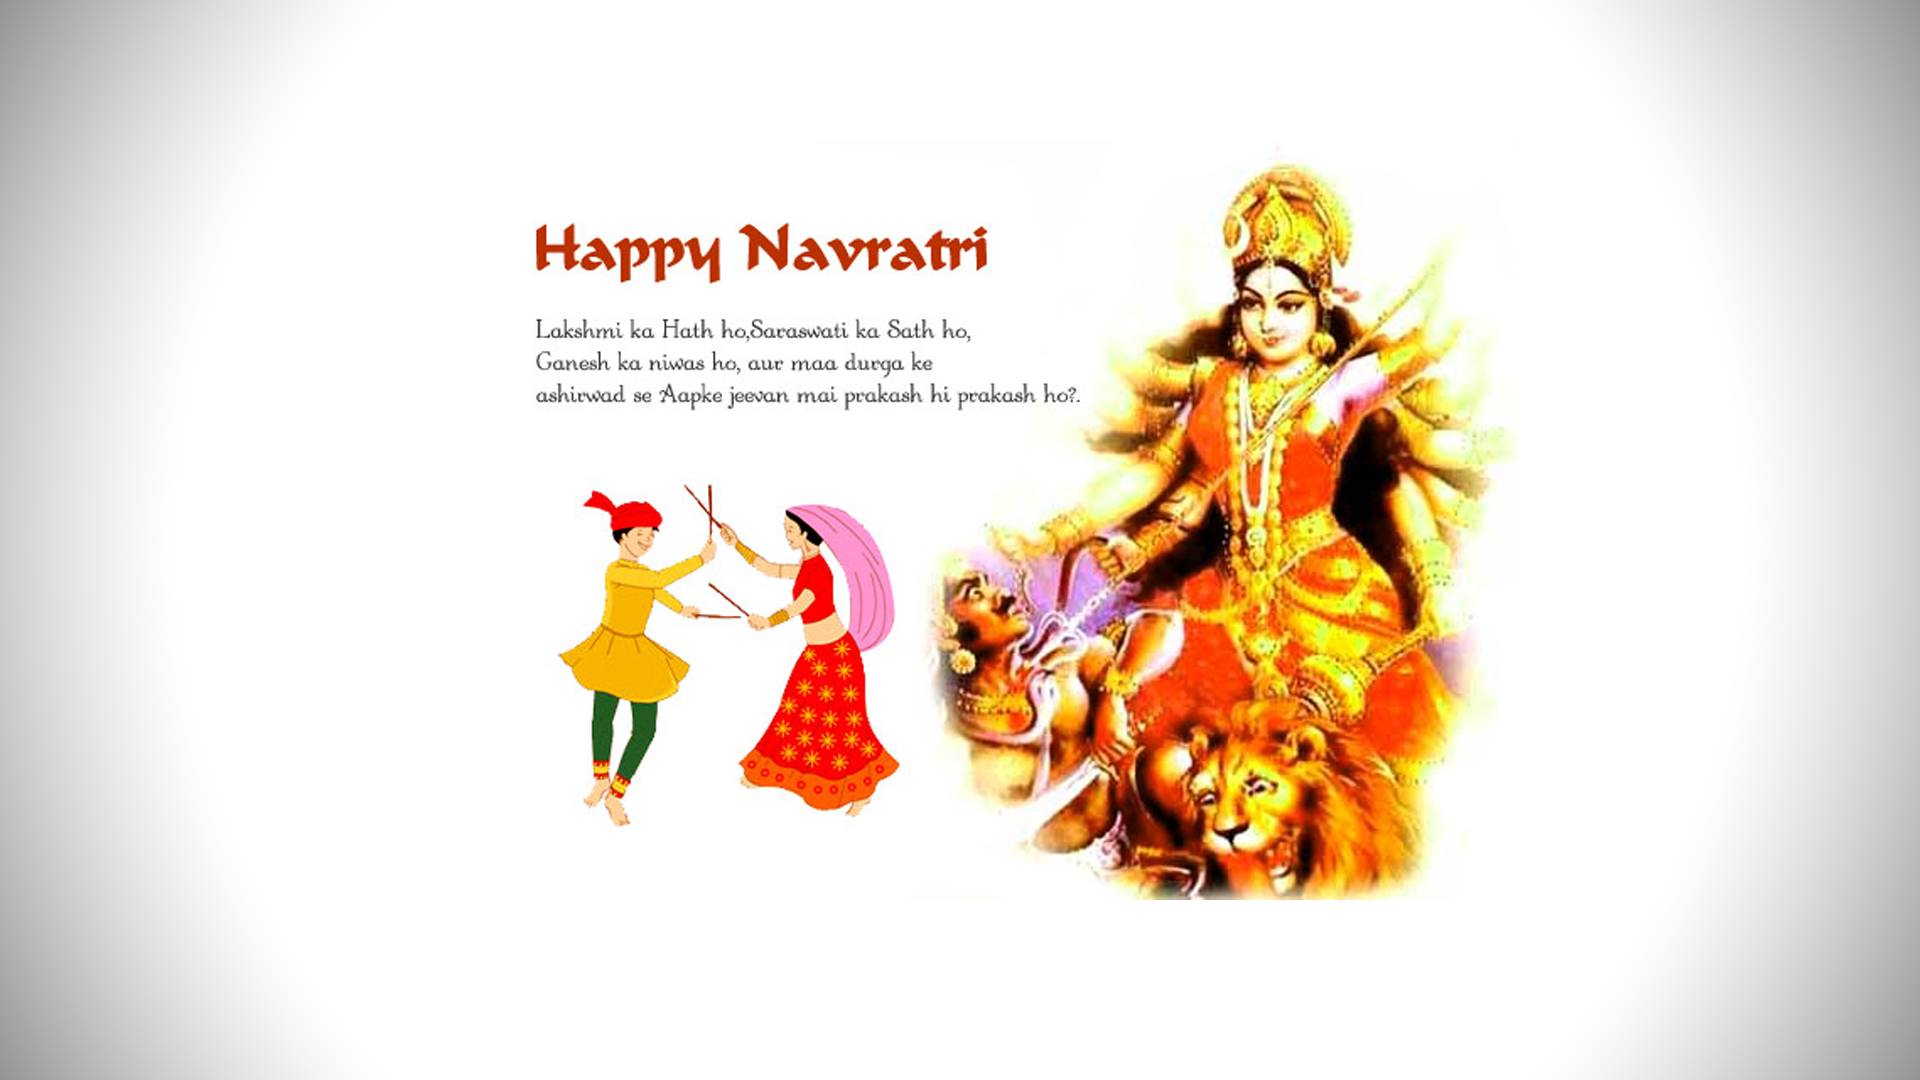 Happy Navratri Whatsapp Status and Facebook Messages